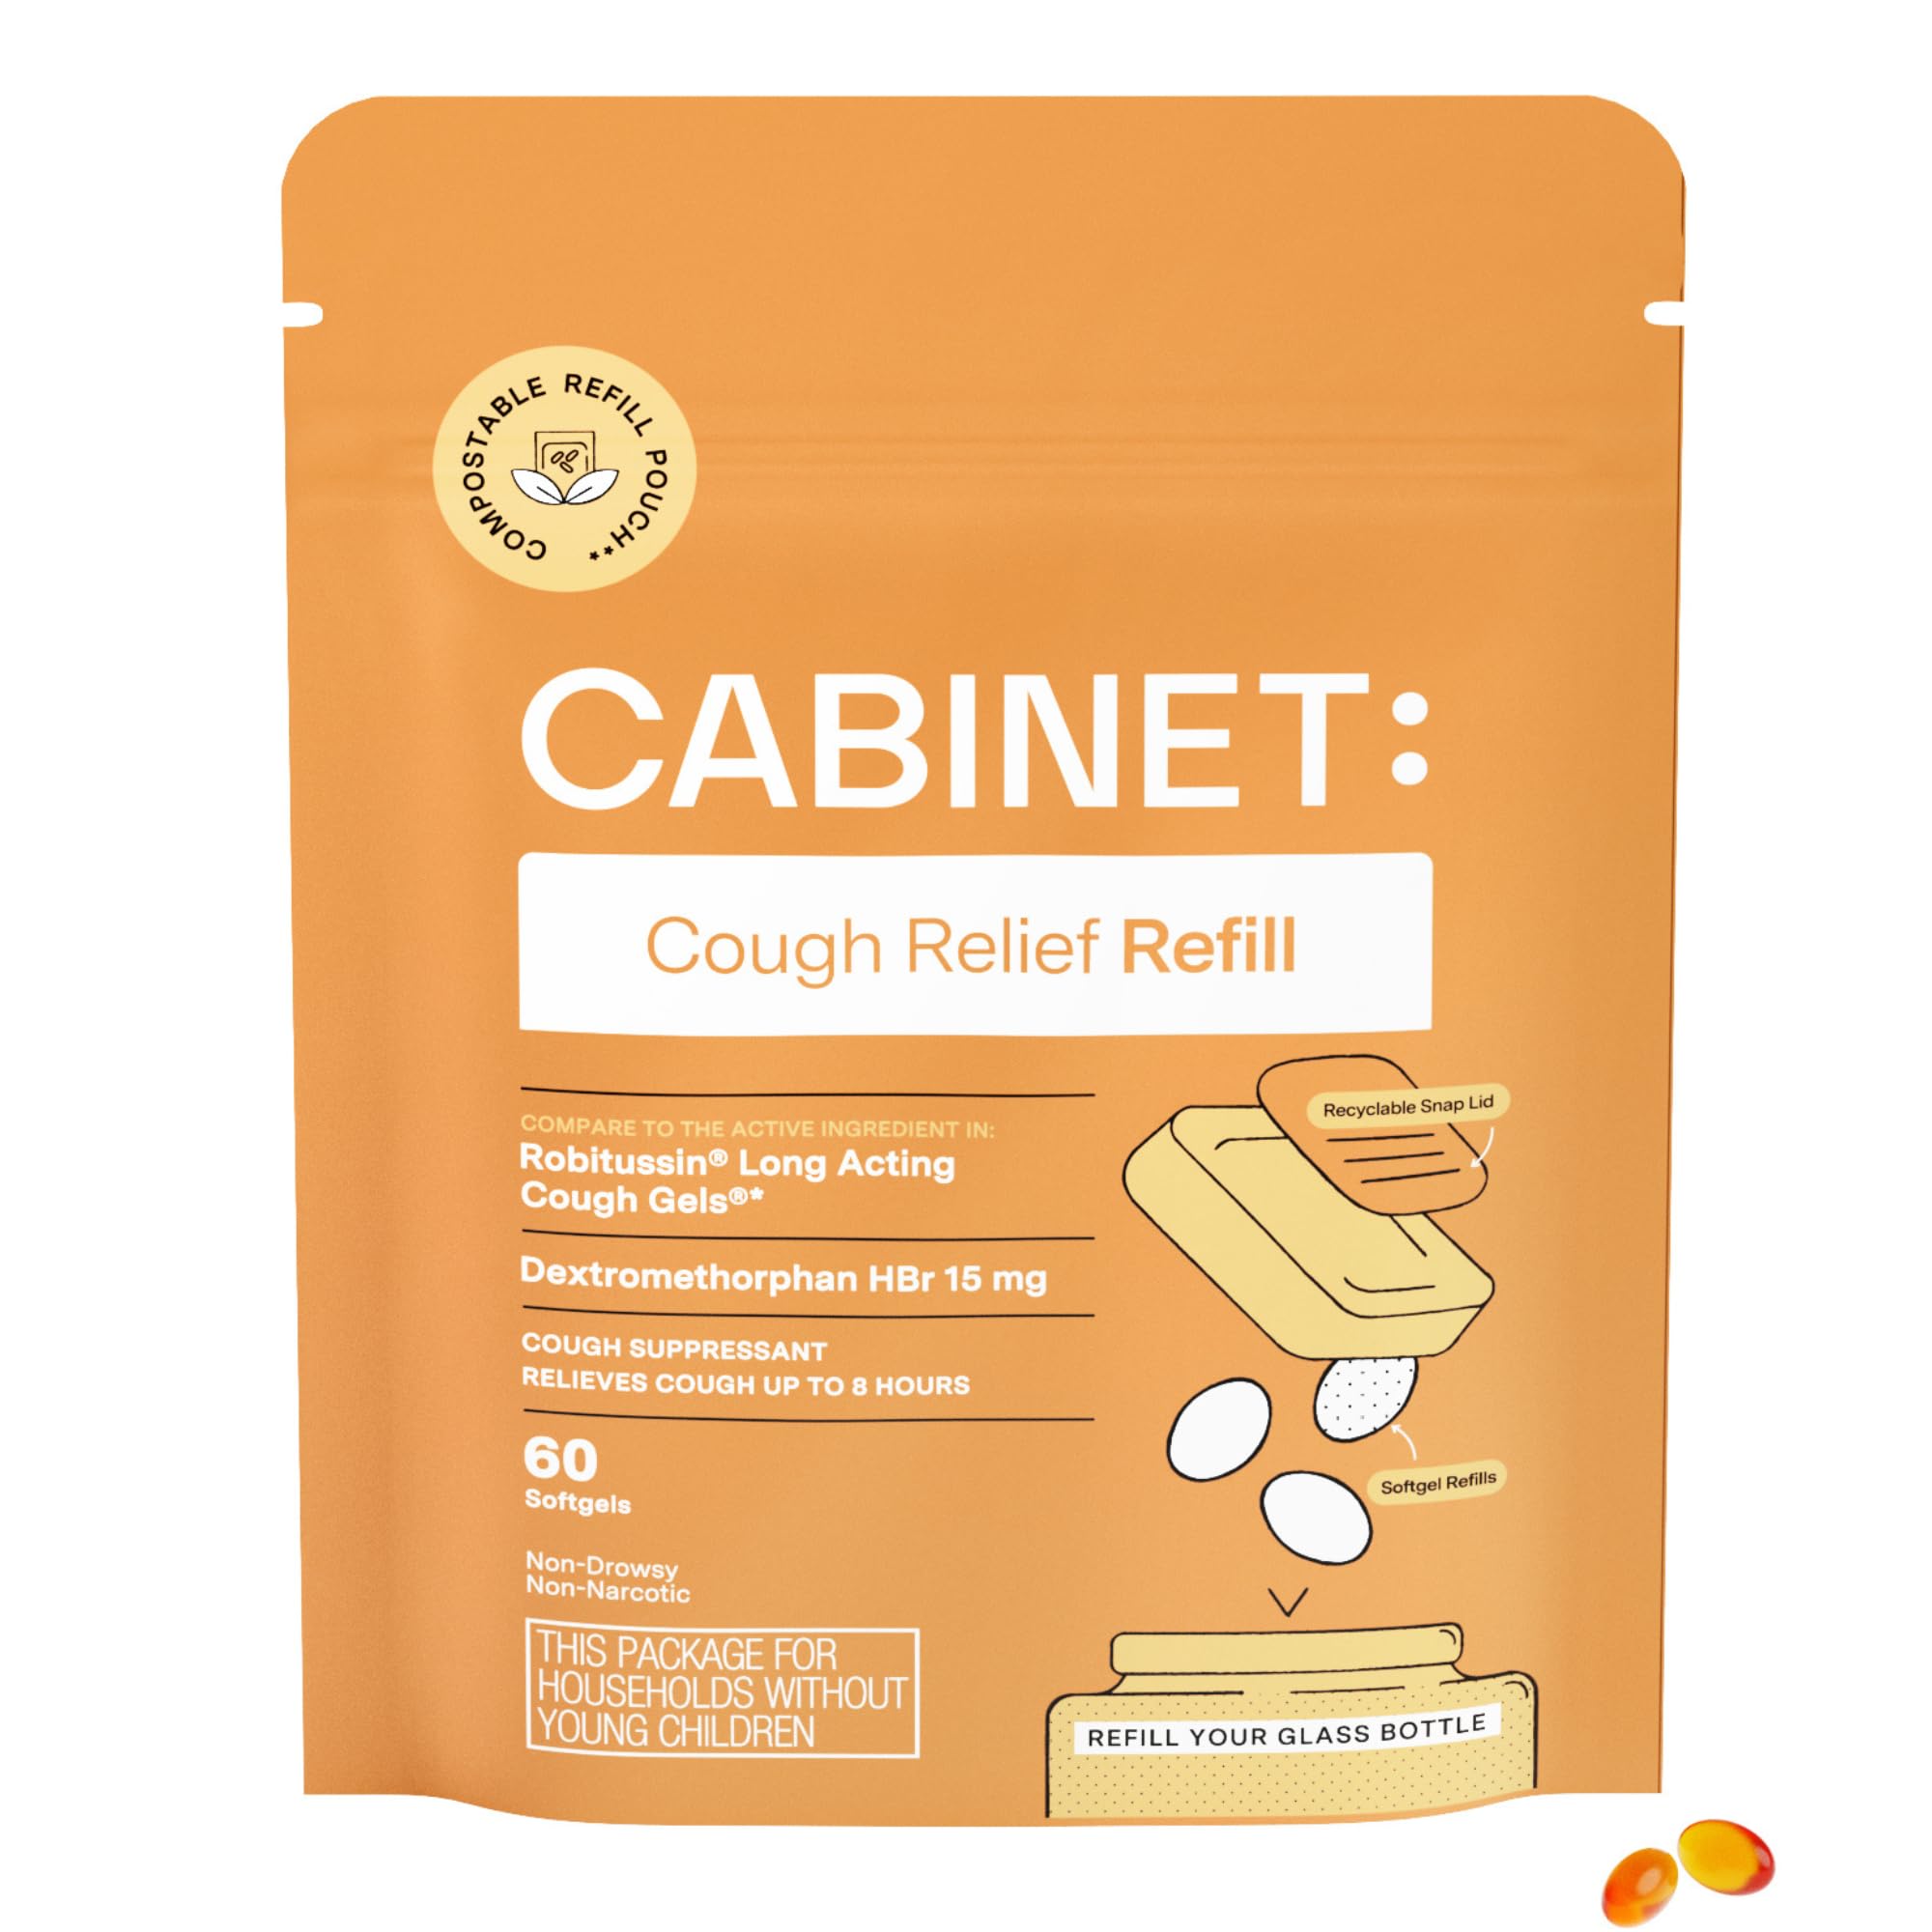 Cabinet: Non-Drowsy Cough Relief Softgels w/Active Ingredient Dextromethorphan Suitable for Adults, Comparable to Robitussin®, 60 Softgels (Refill)